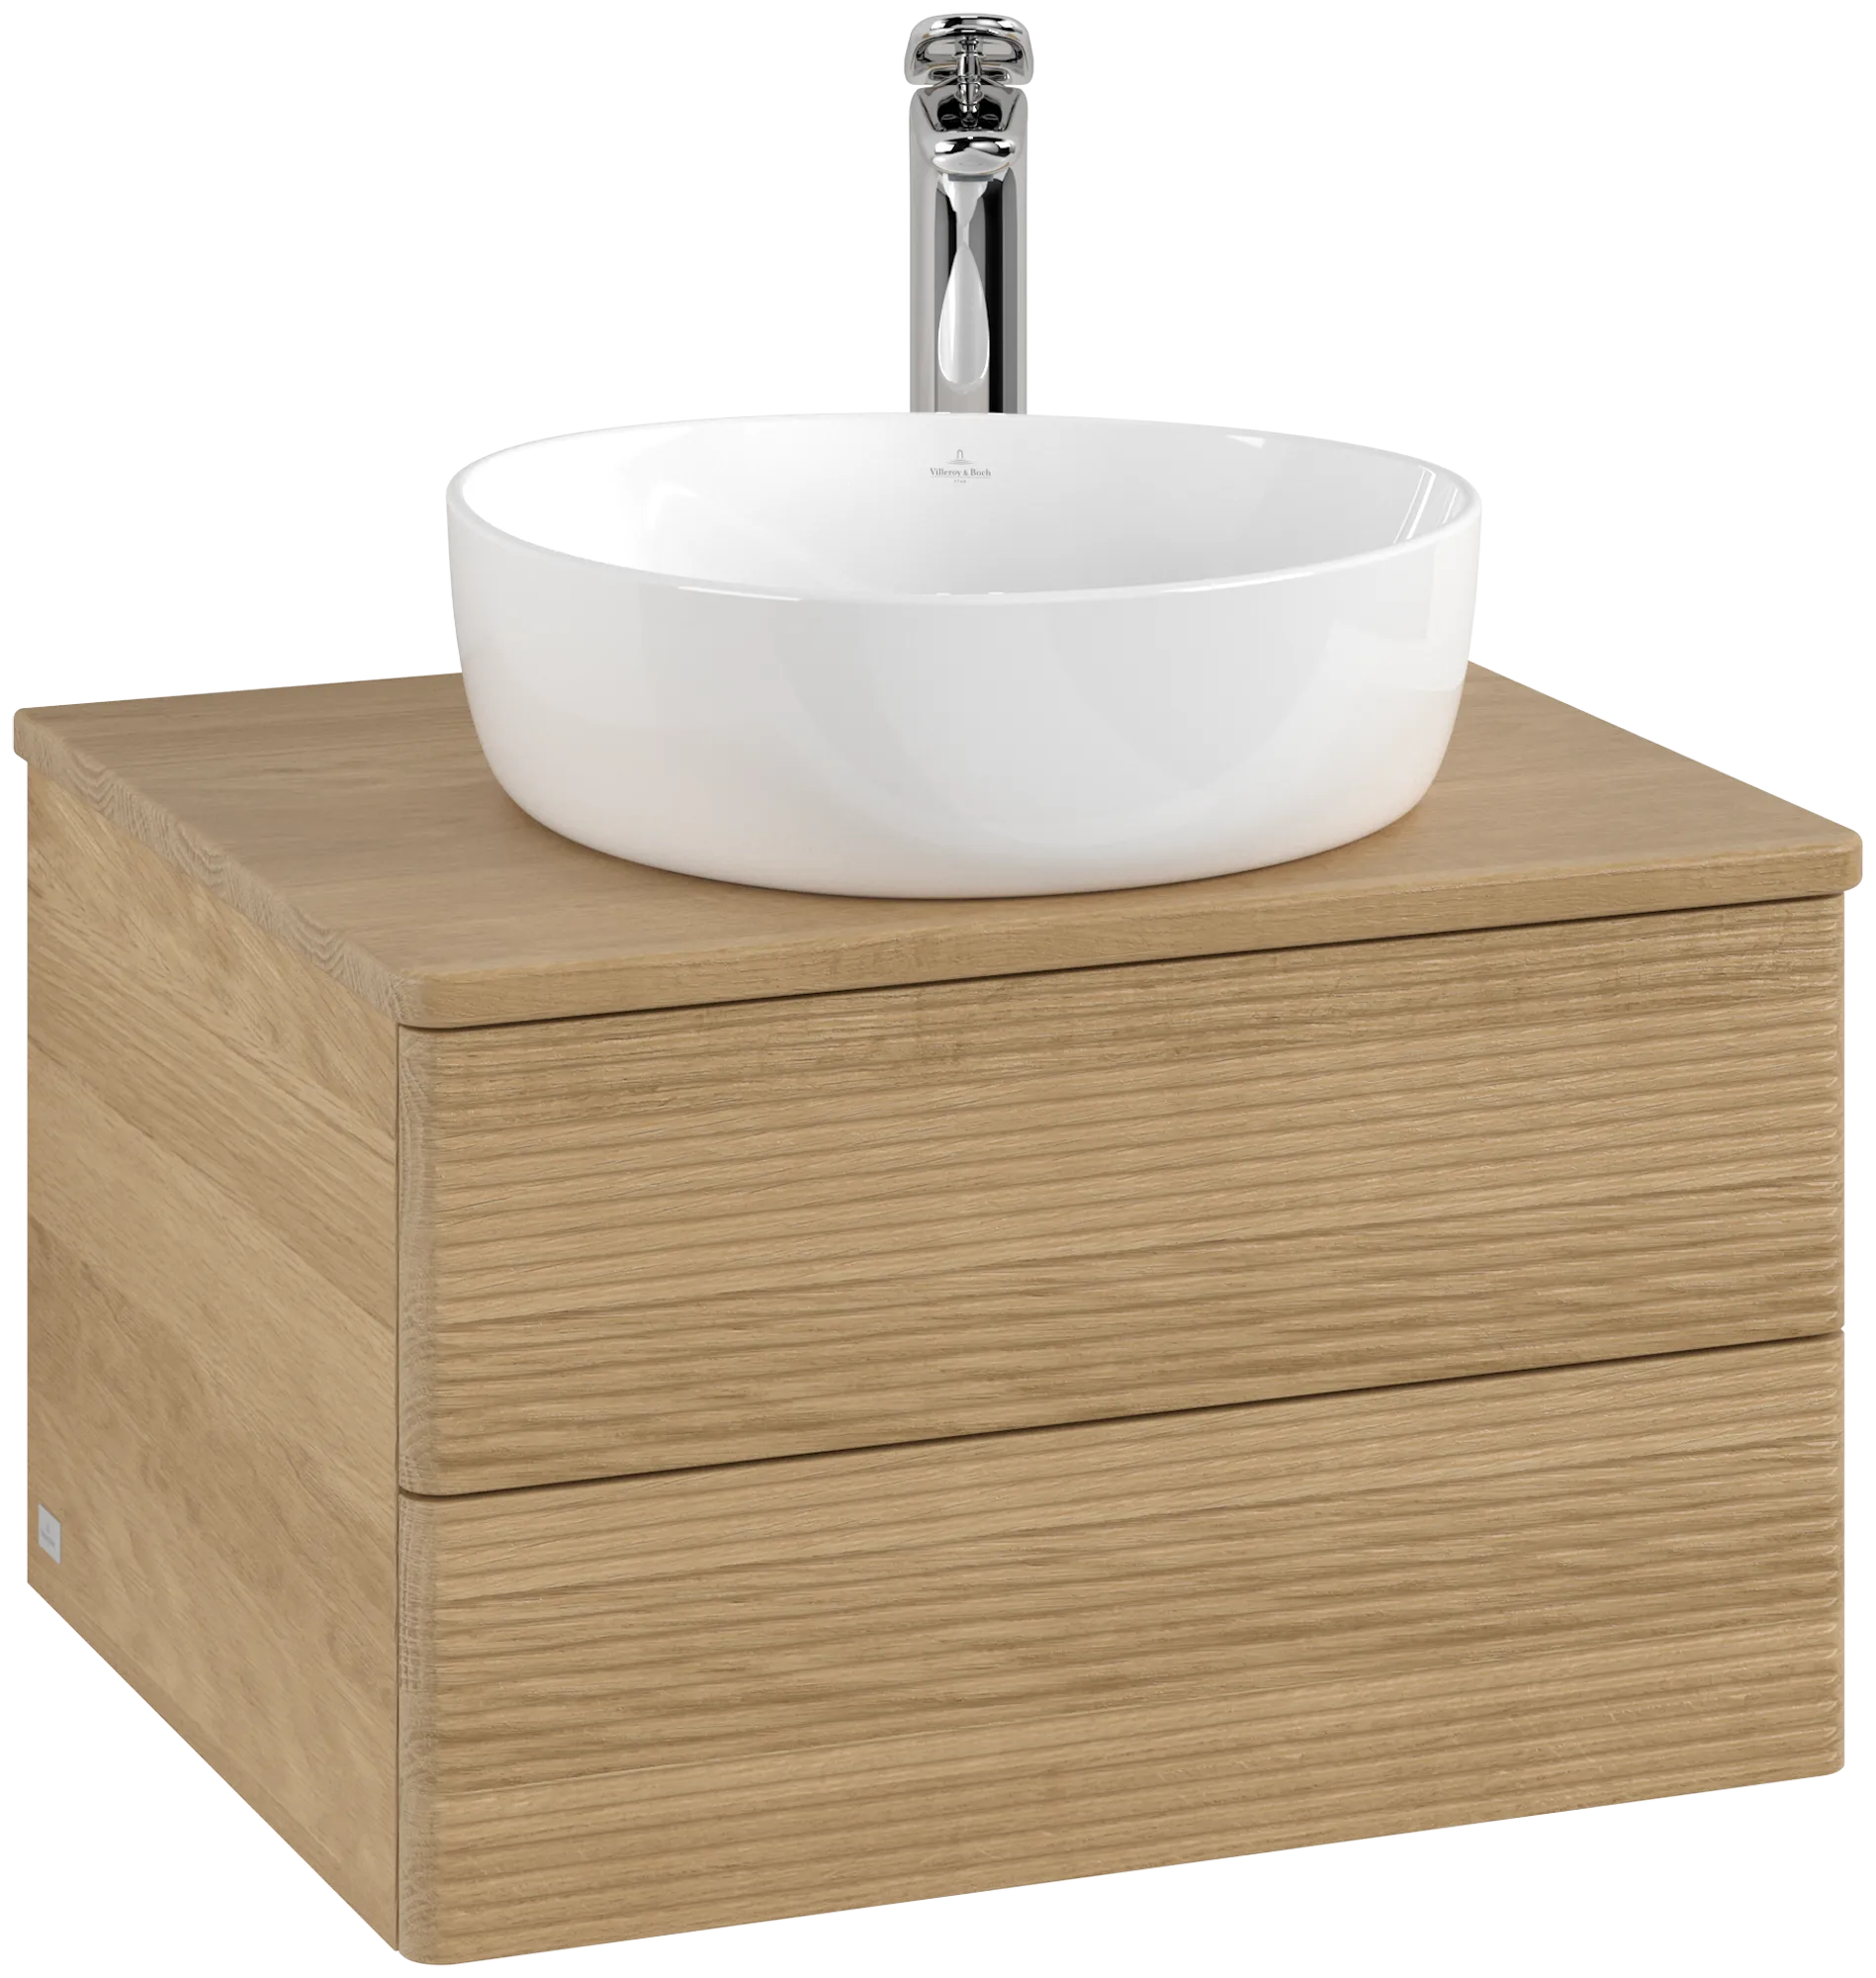 Picture of VILLEROY BOCH Antao Vanity unit, with lighting, 2 pull-out compartments, 600 x 360 x 500 mm, Front with grain texture, Honey Oak / Honey Oak #L18151HN